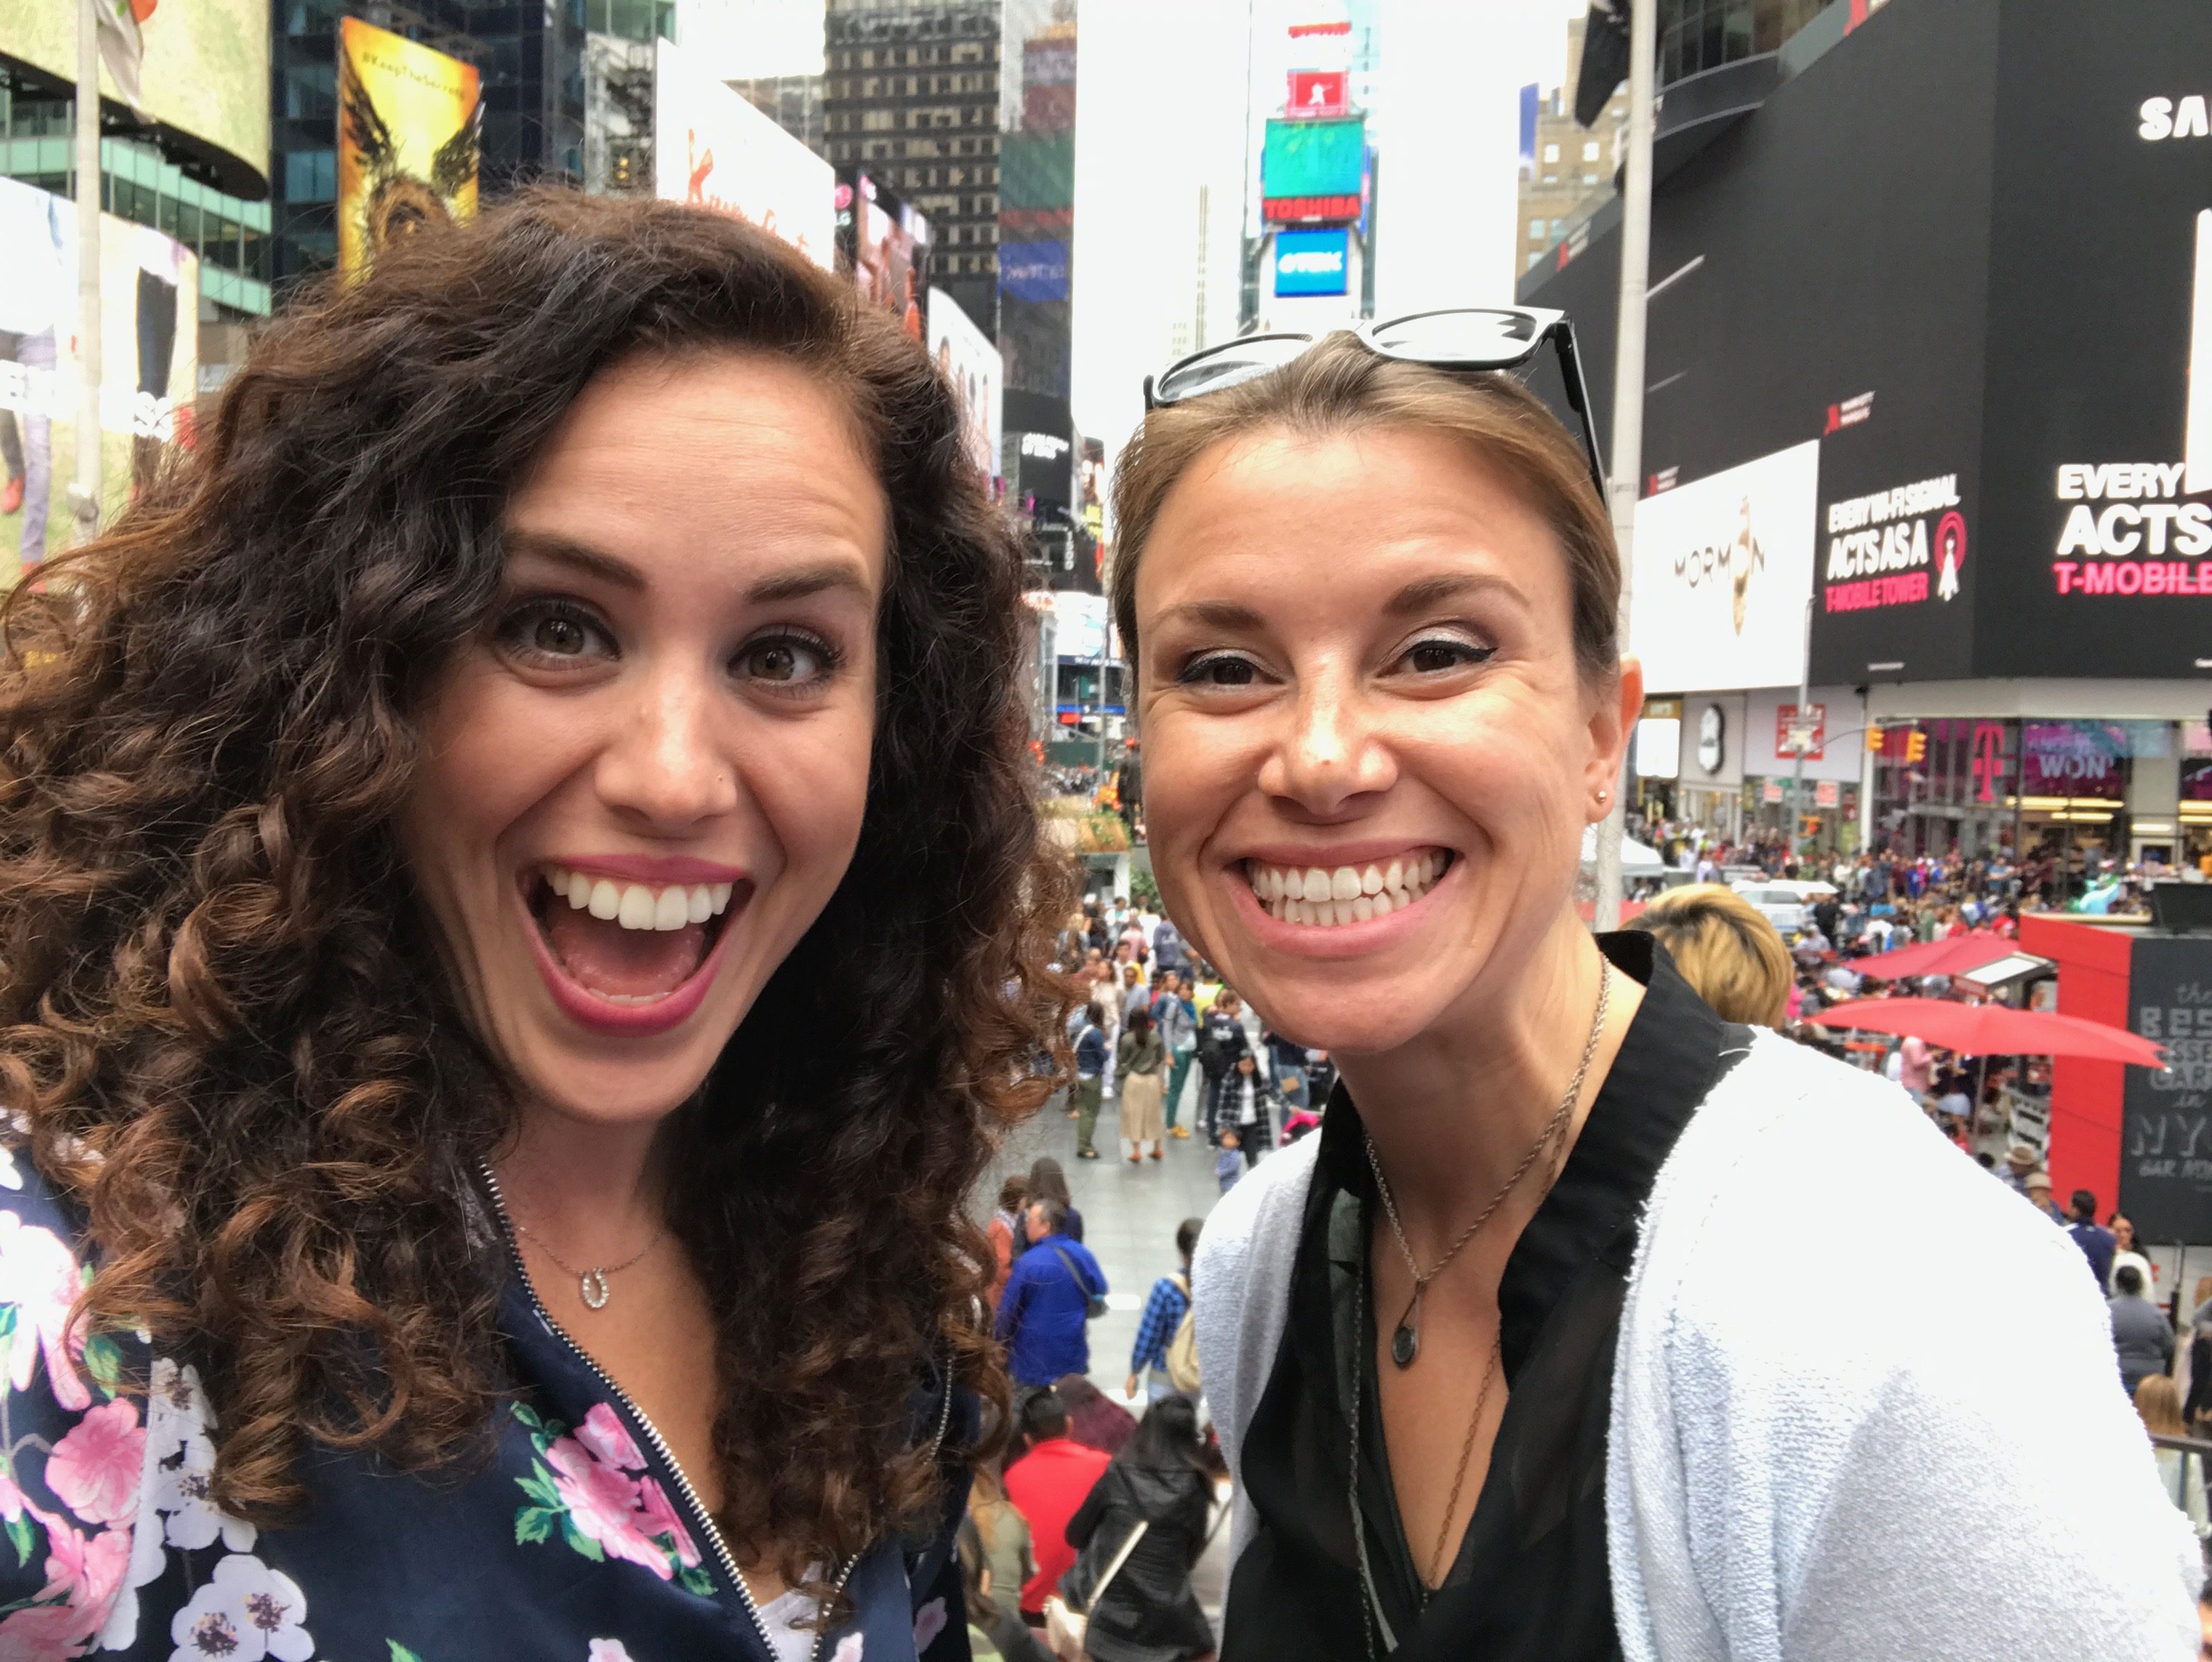 NYC Vlog: Two Girls, a monkey and a trapeze!